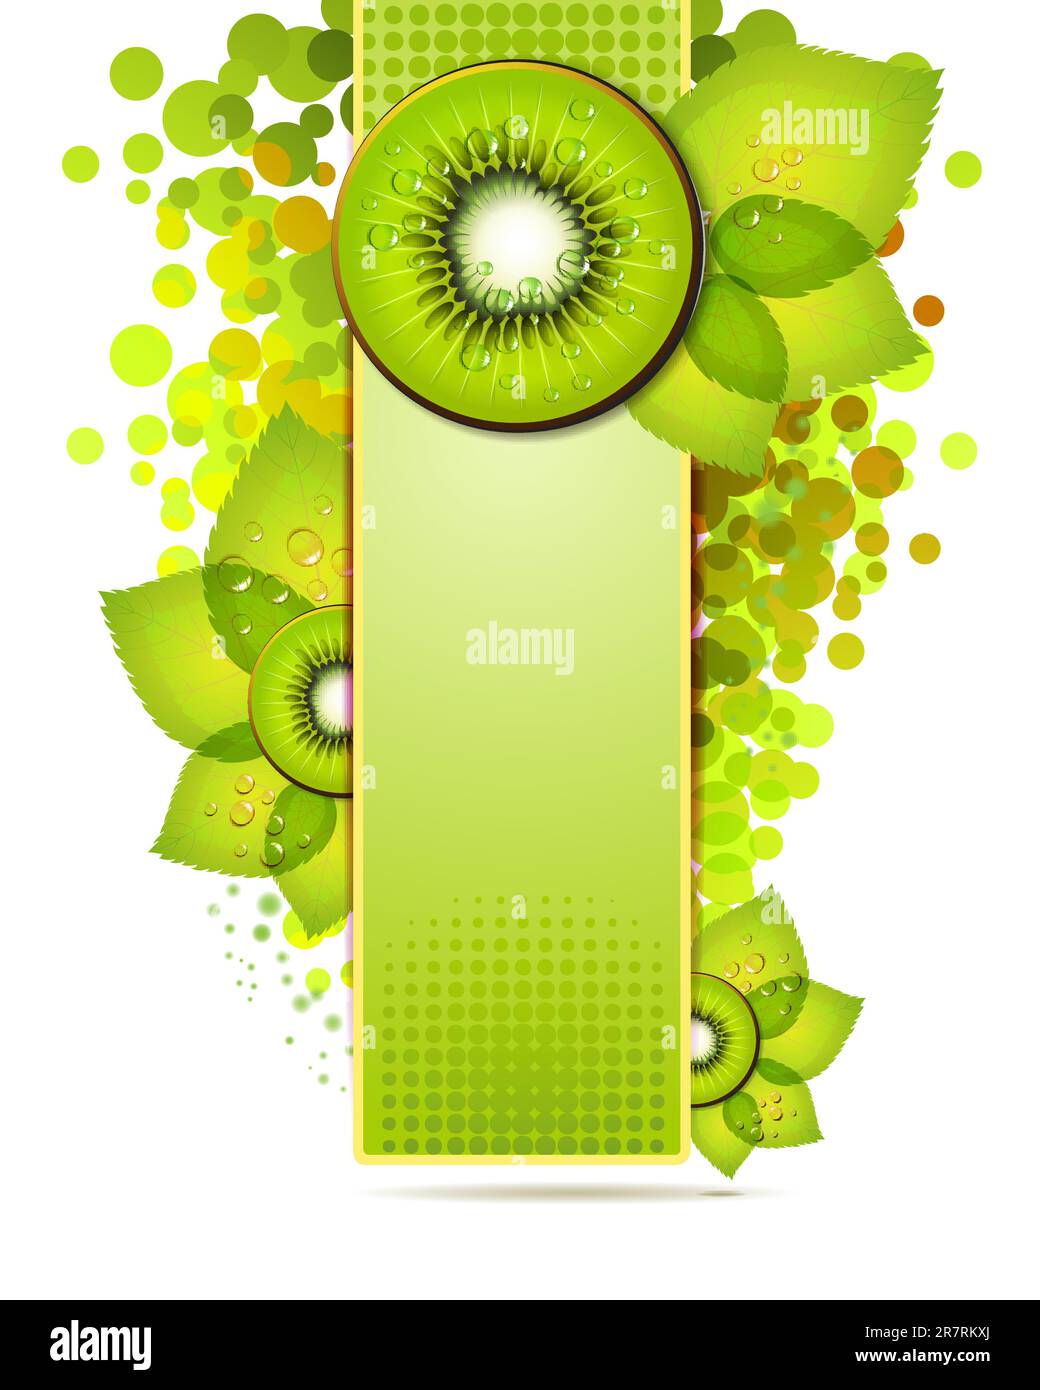 Green banner with kiwi slices over white background Stock Vector